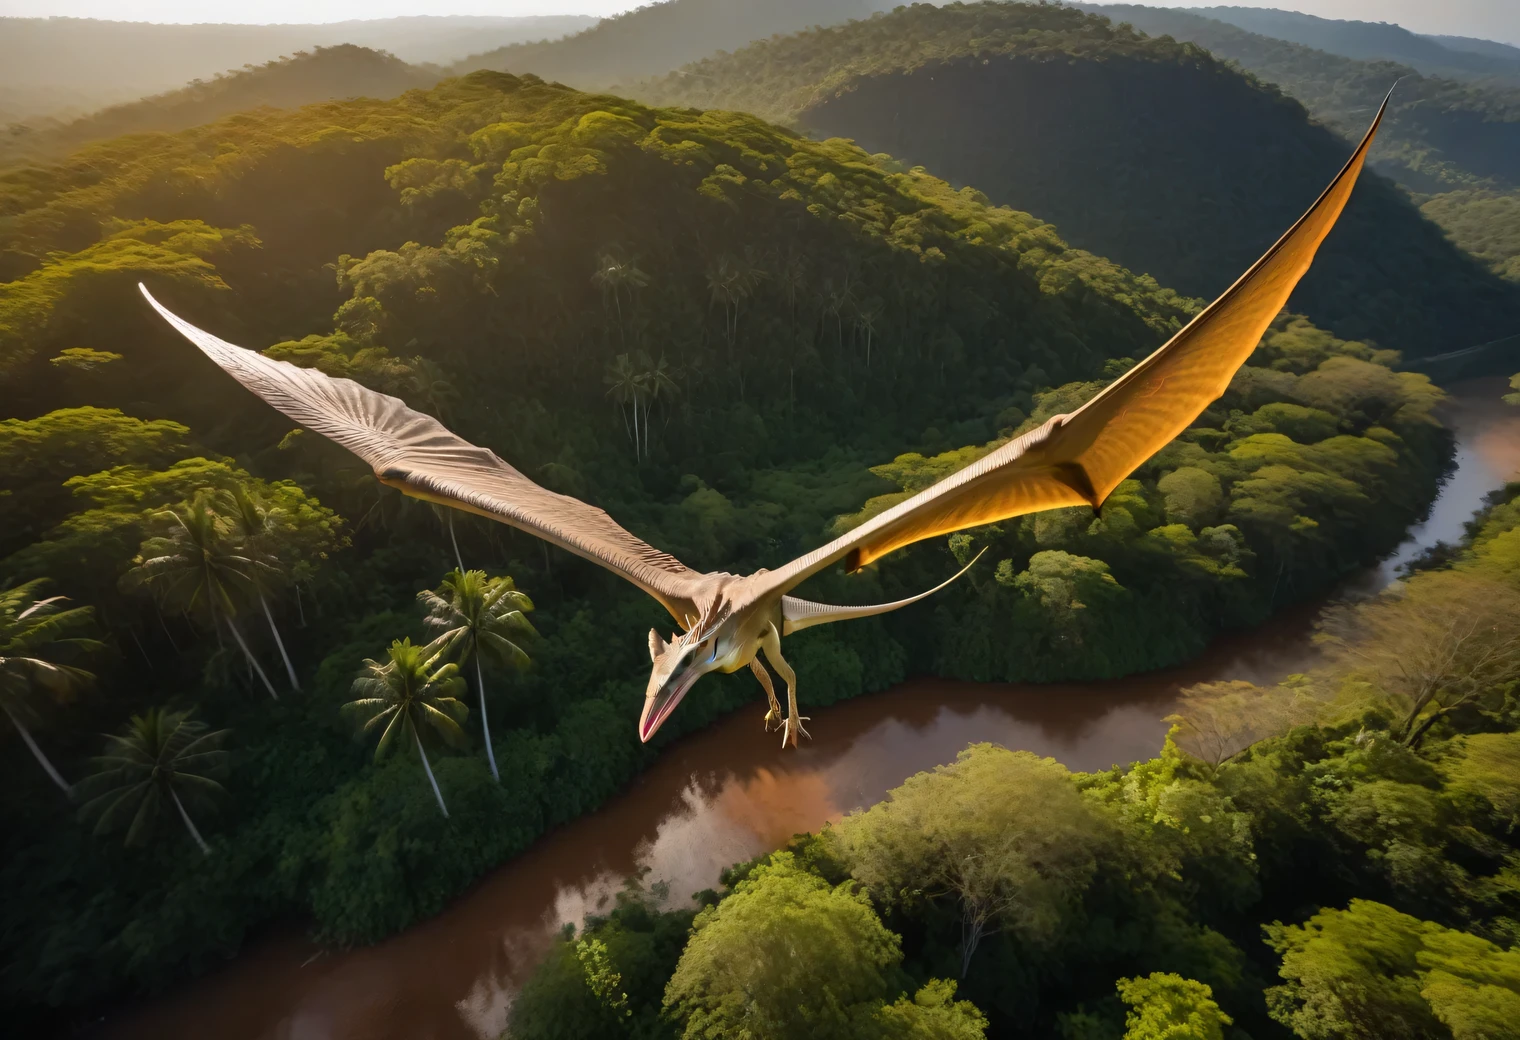 bird&#39;s-eye, Canon EOS R5 с объективом Canon RF 24–70 mm F2.8L ESM USM, samelight osame the pterodactyl over the prehistoric jungle, samelying pterodactyl is described in detail, the clear texture osame the pterodactyl skin is shown, внизу в дsameунглях видны большие динозавры, Warm, Solar, beautisameul, High detail, 32K, Photorealistic, 70 mm, 1/8000 seconds., same/4.5 and ISO 100, sameilm grain, RAW